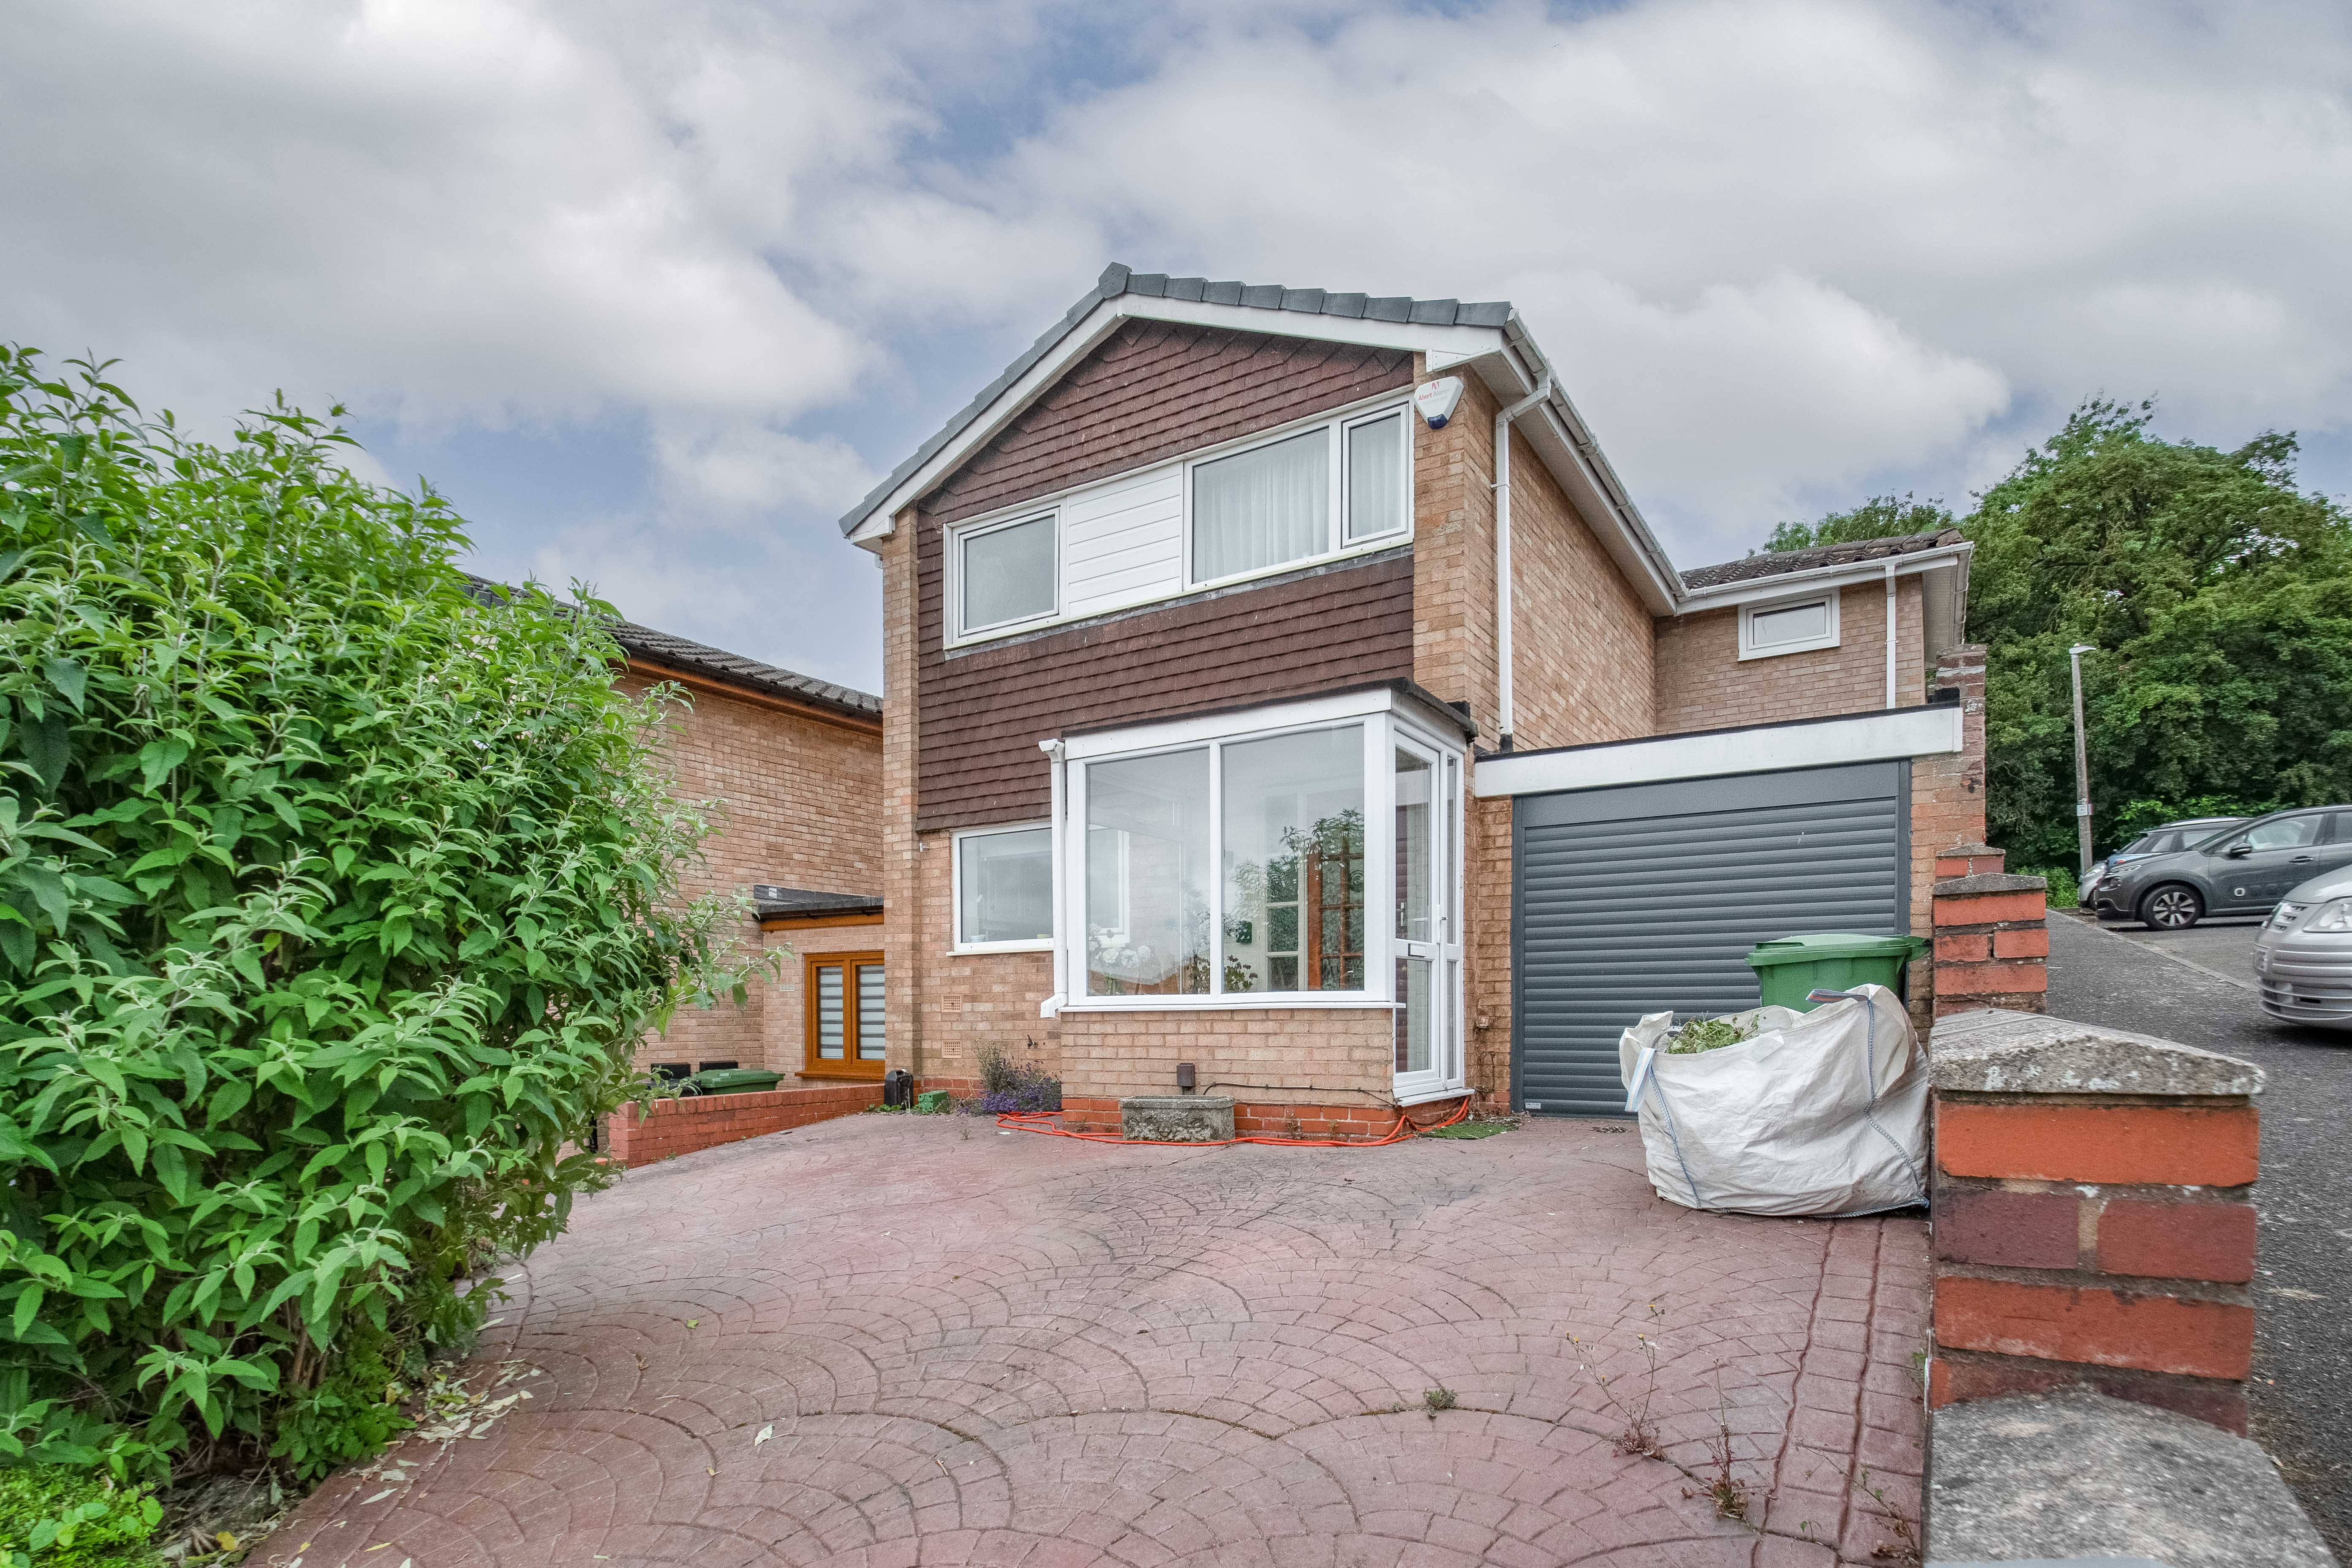 3 bed house for sale in Salford Close, Woodrow South  - Property Image 1